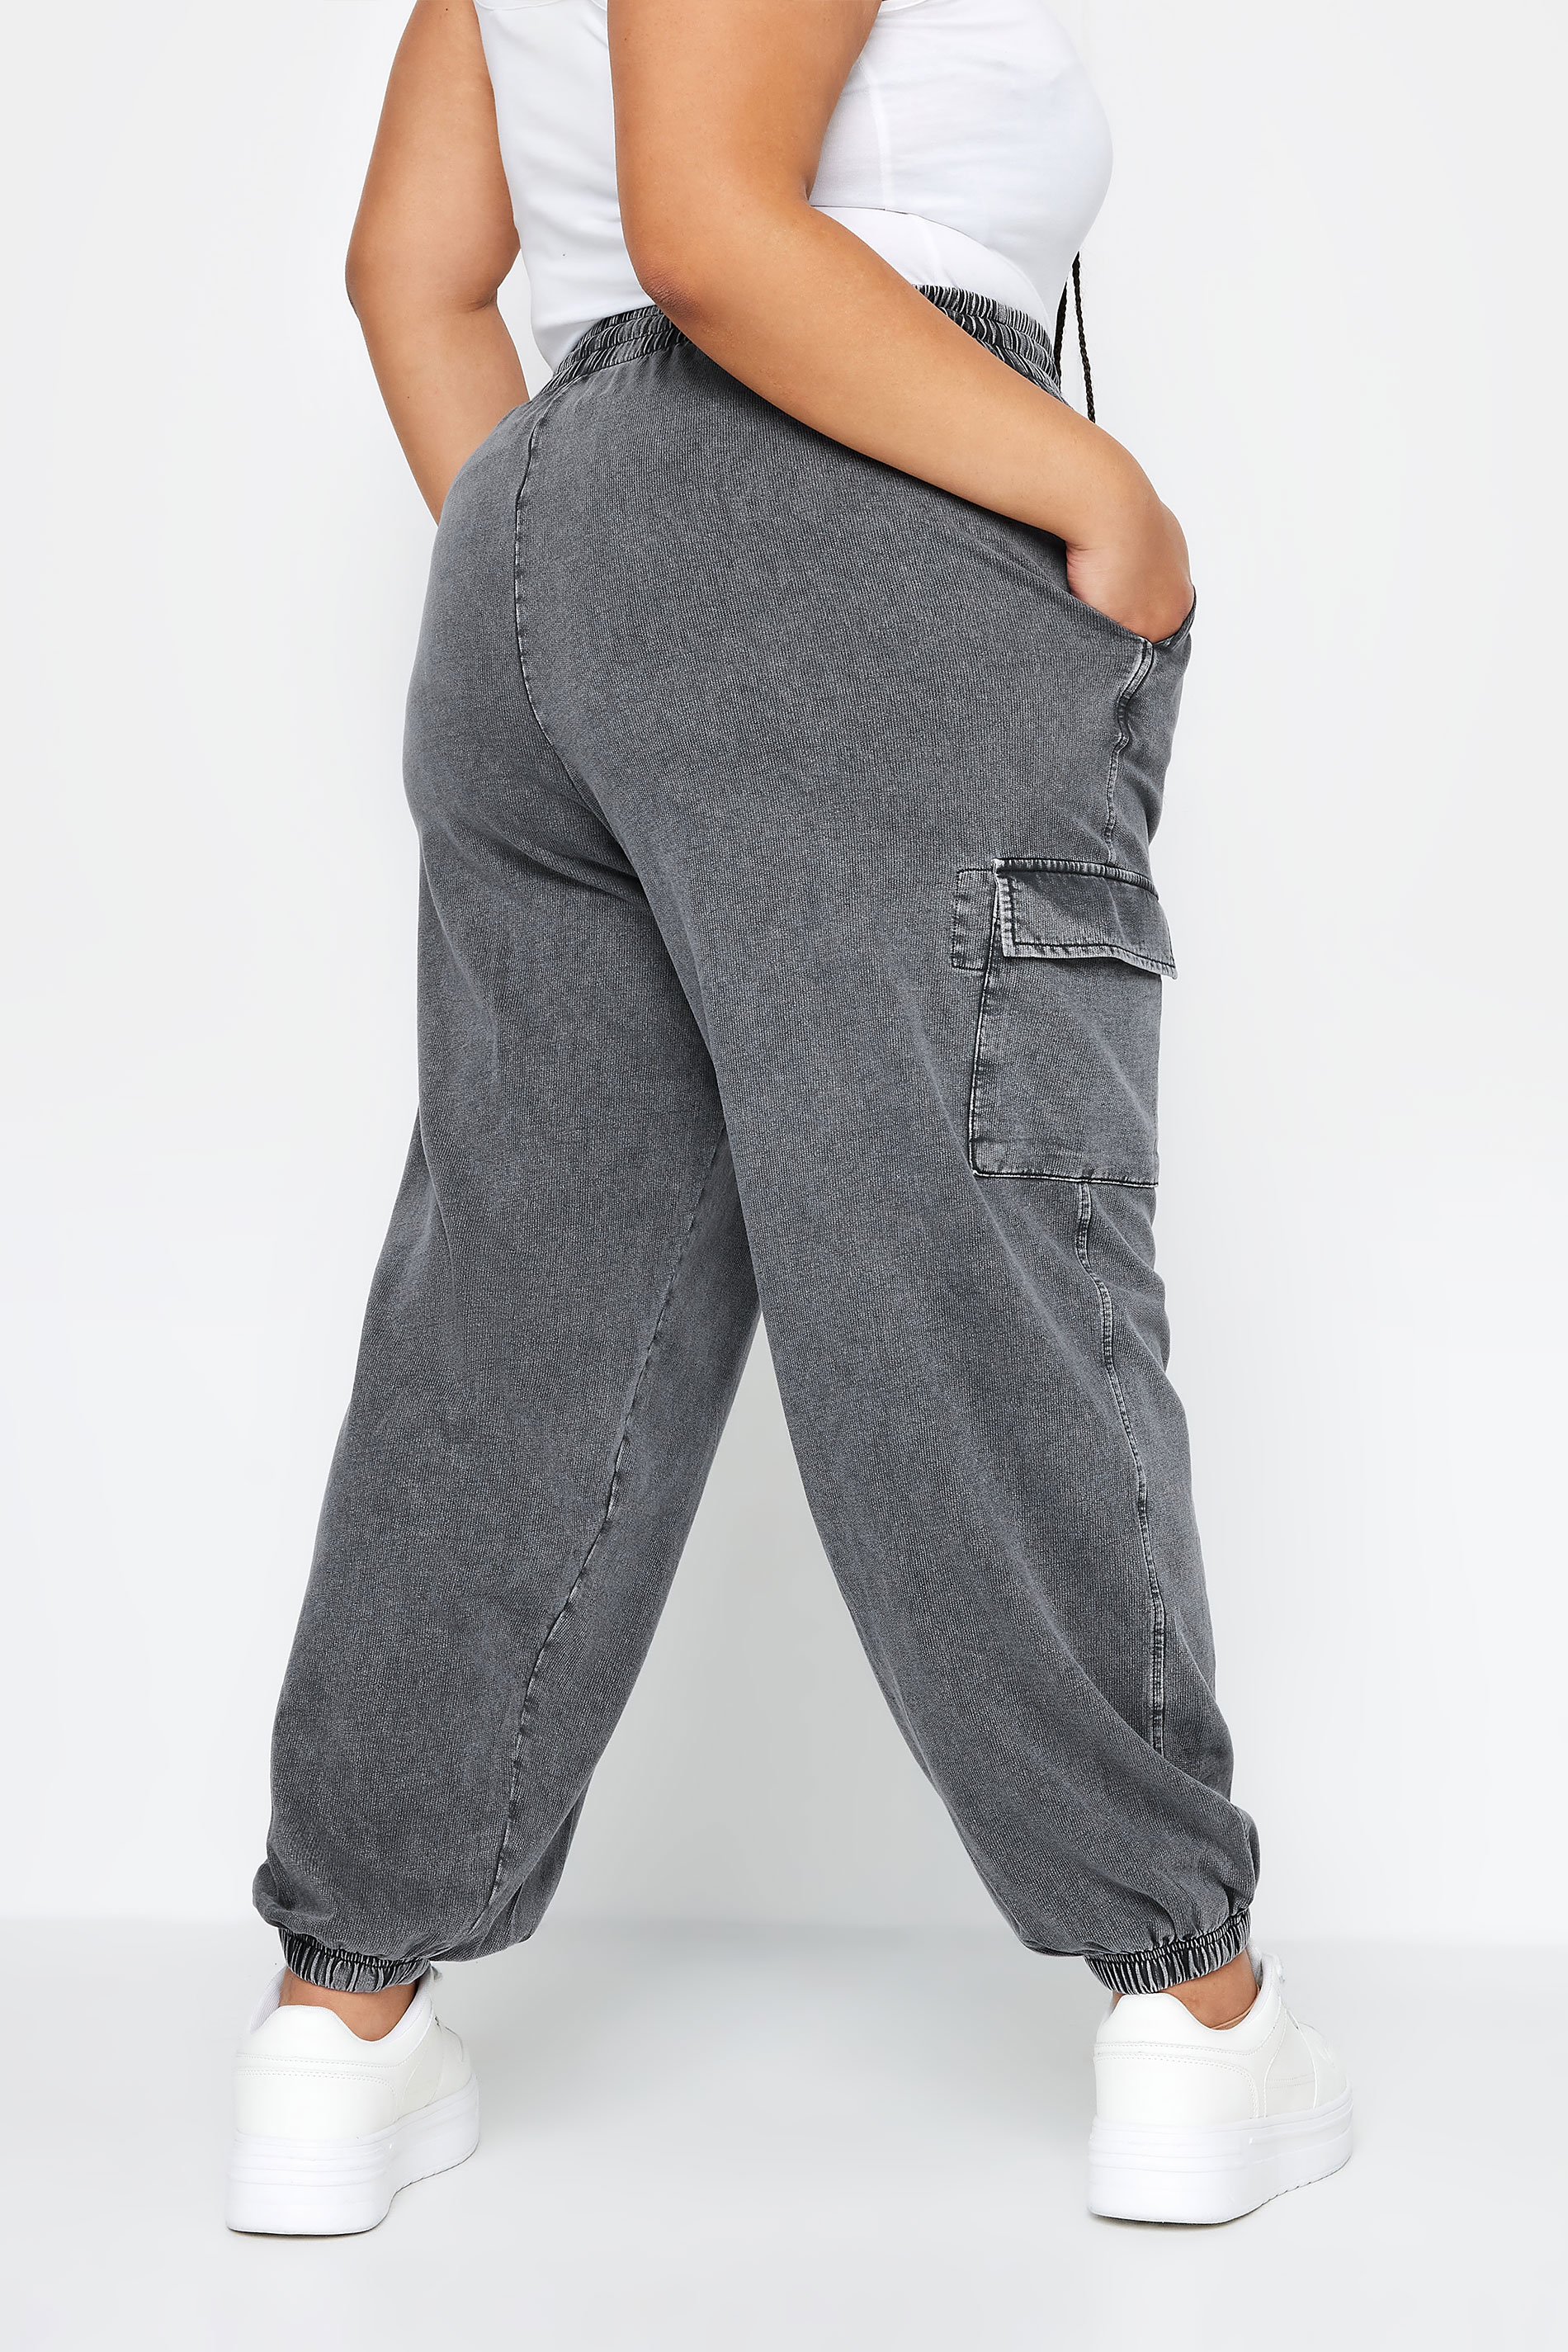 LIMITED COLLECTION Plus Size Grey Acid Wash Cuffed Cargo Joggers | Yours Clothing 3